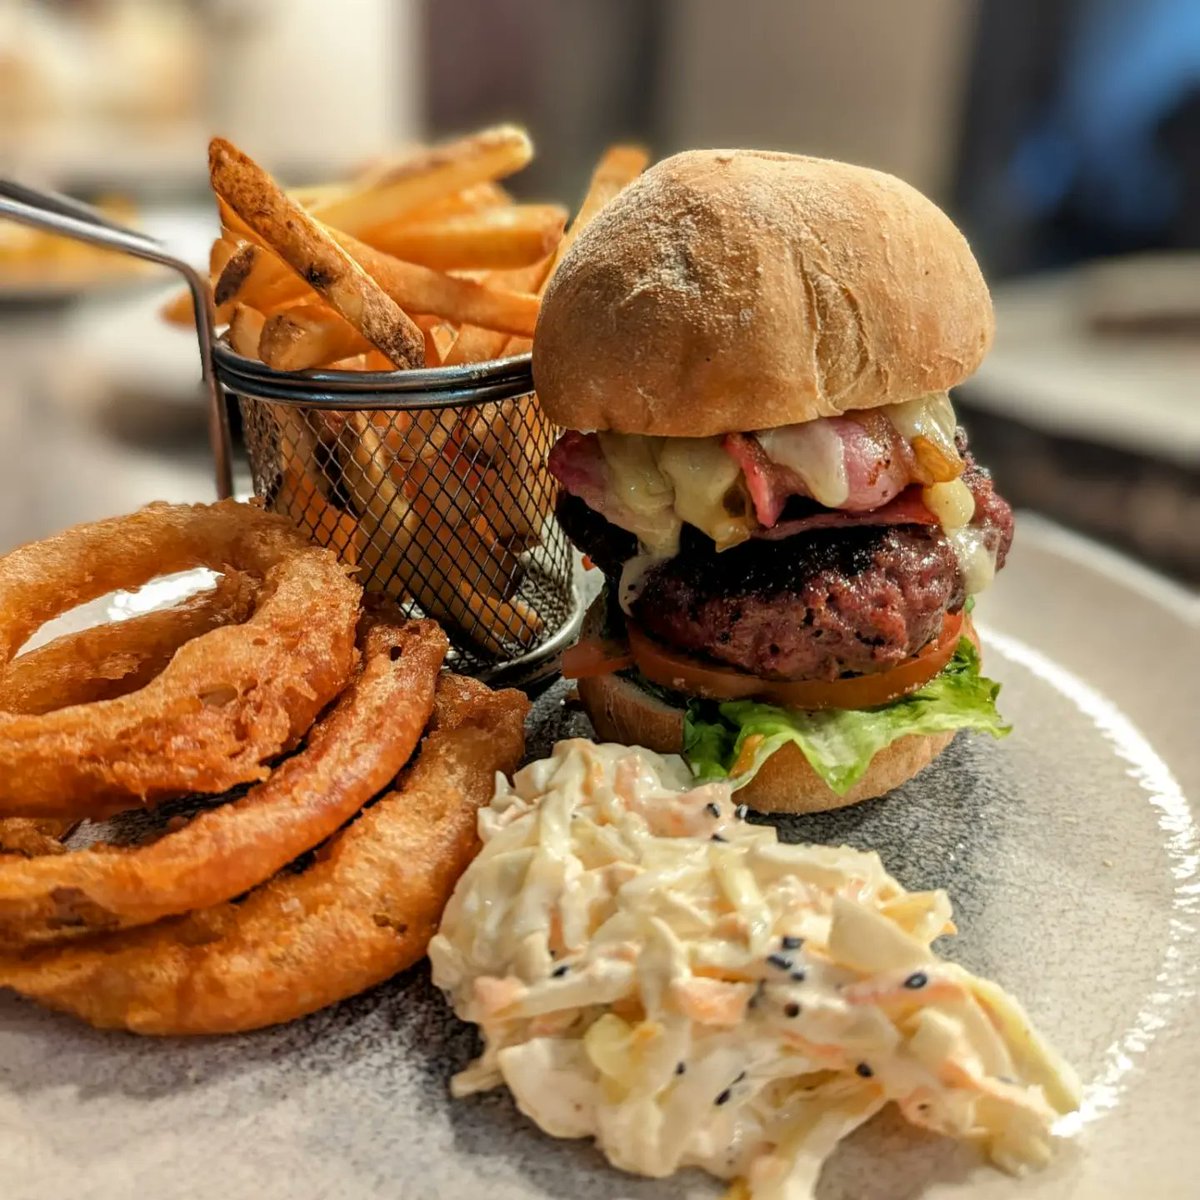 Menu development on our days off...trying to perfect the perfect bun for our homemade fillet steak burger🍔 on our new lunch menu starting this thursday 😀